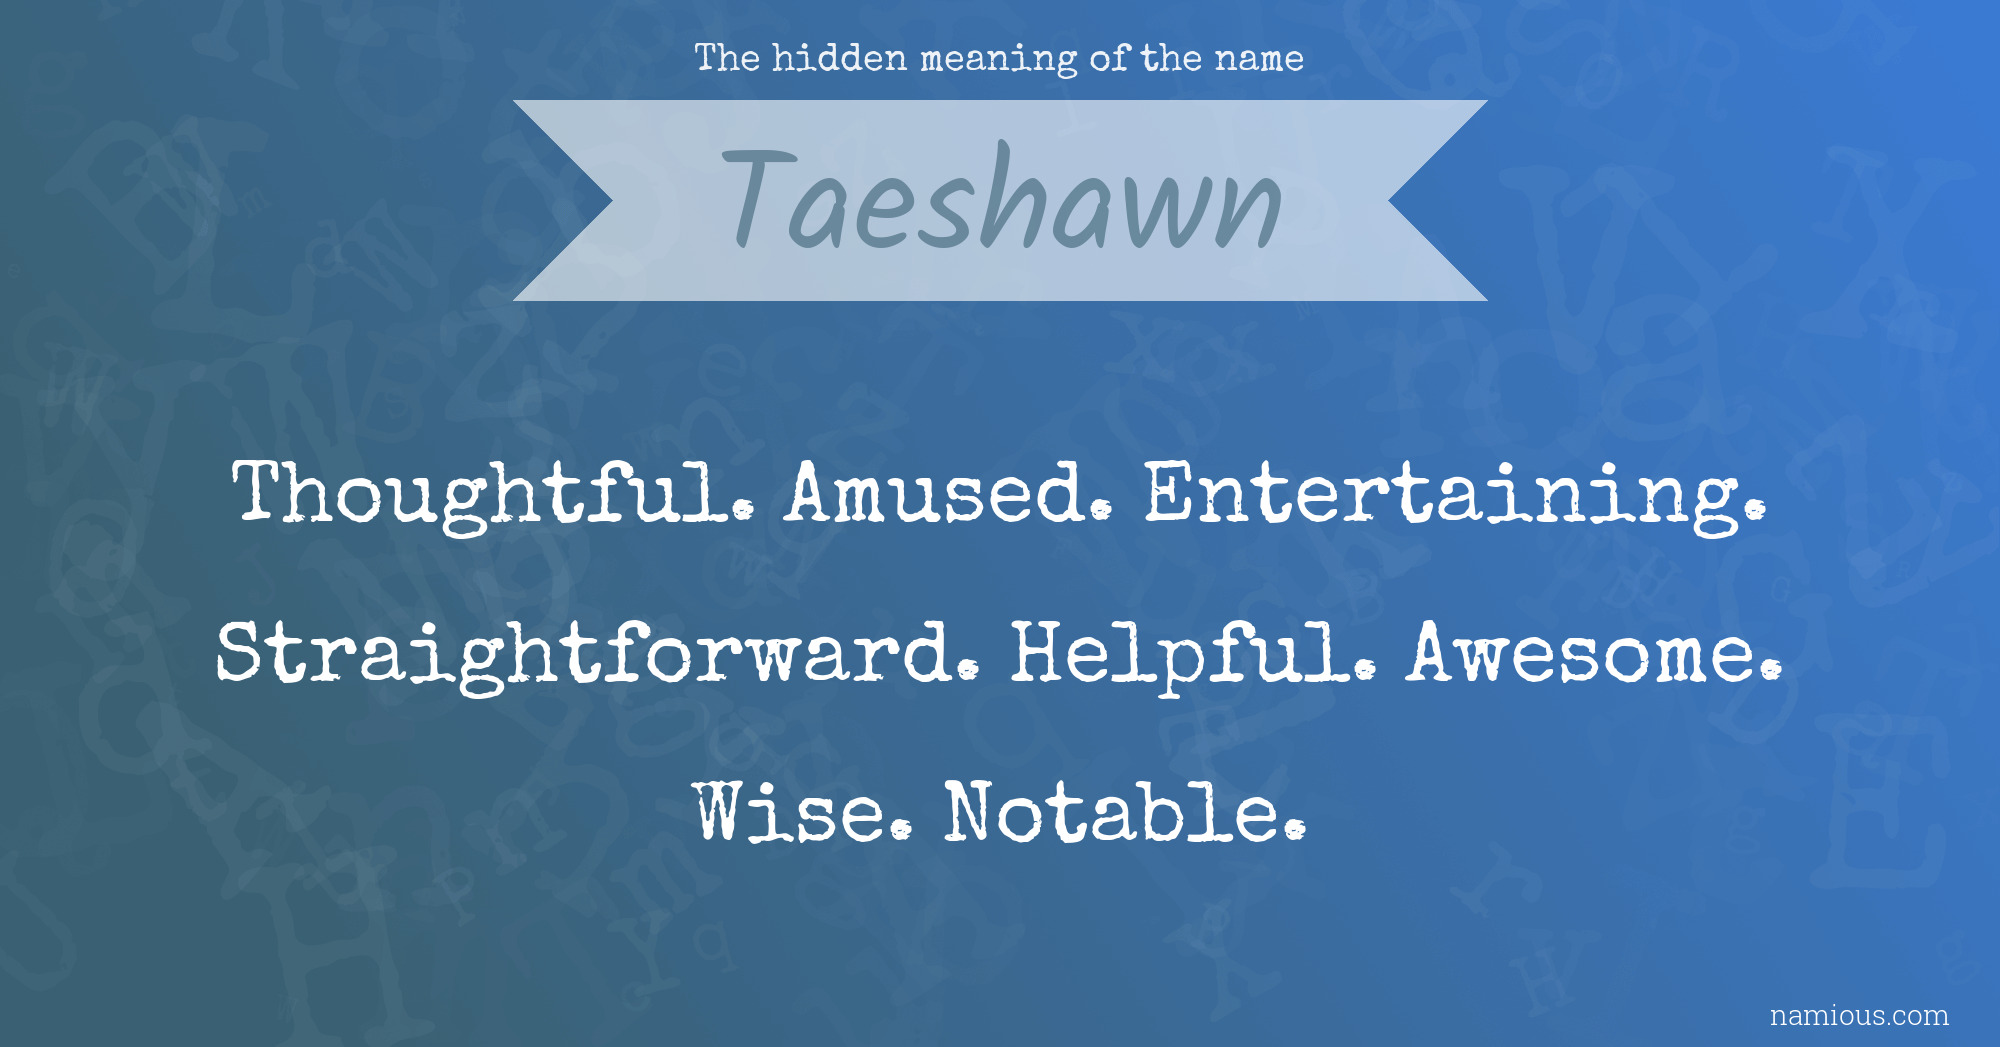 The hidden meaning of the name Taeshawn